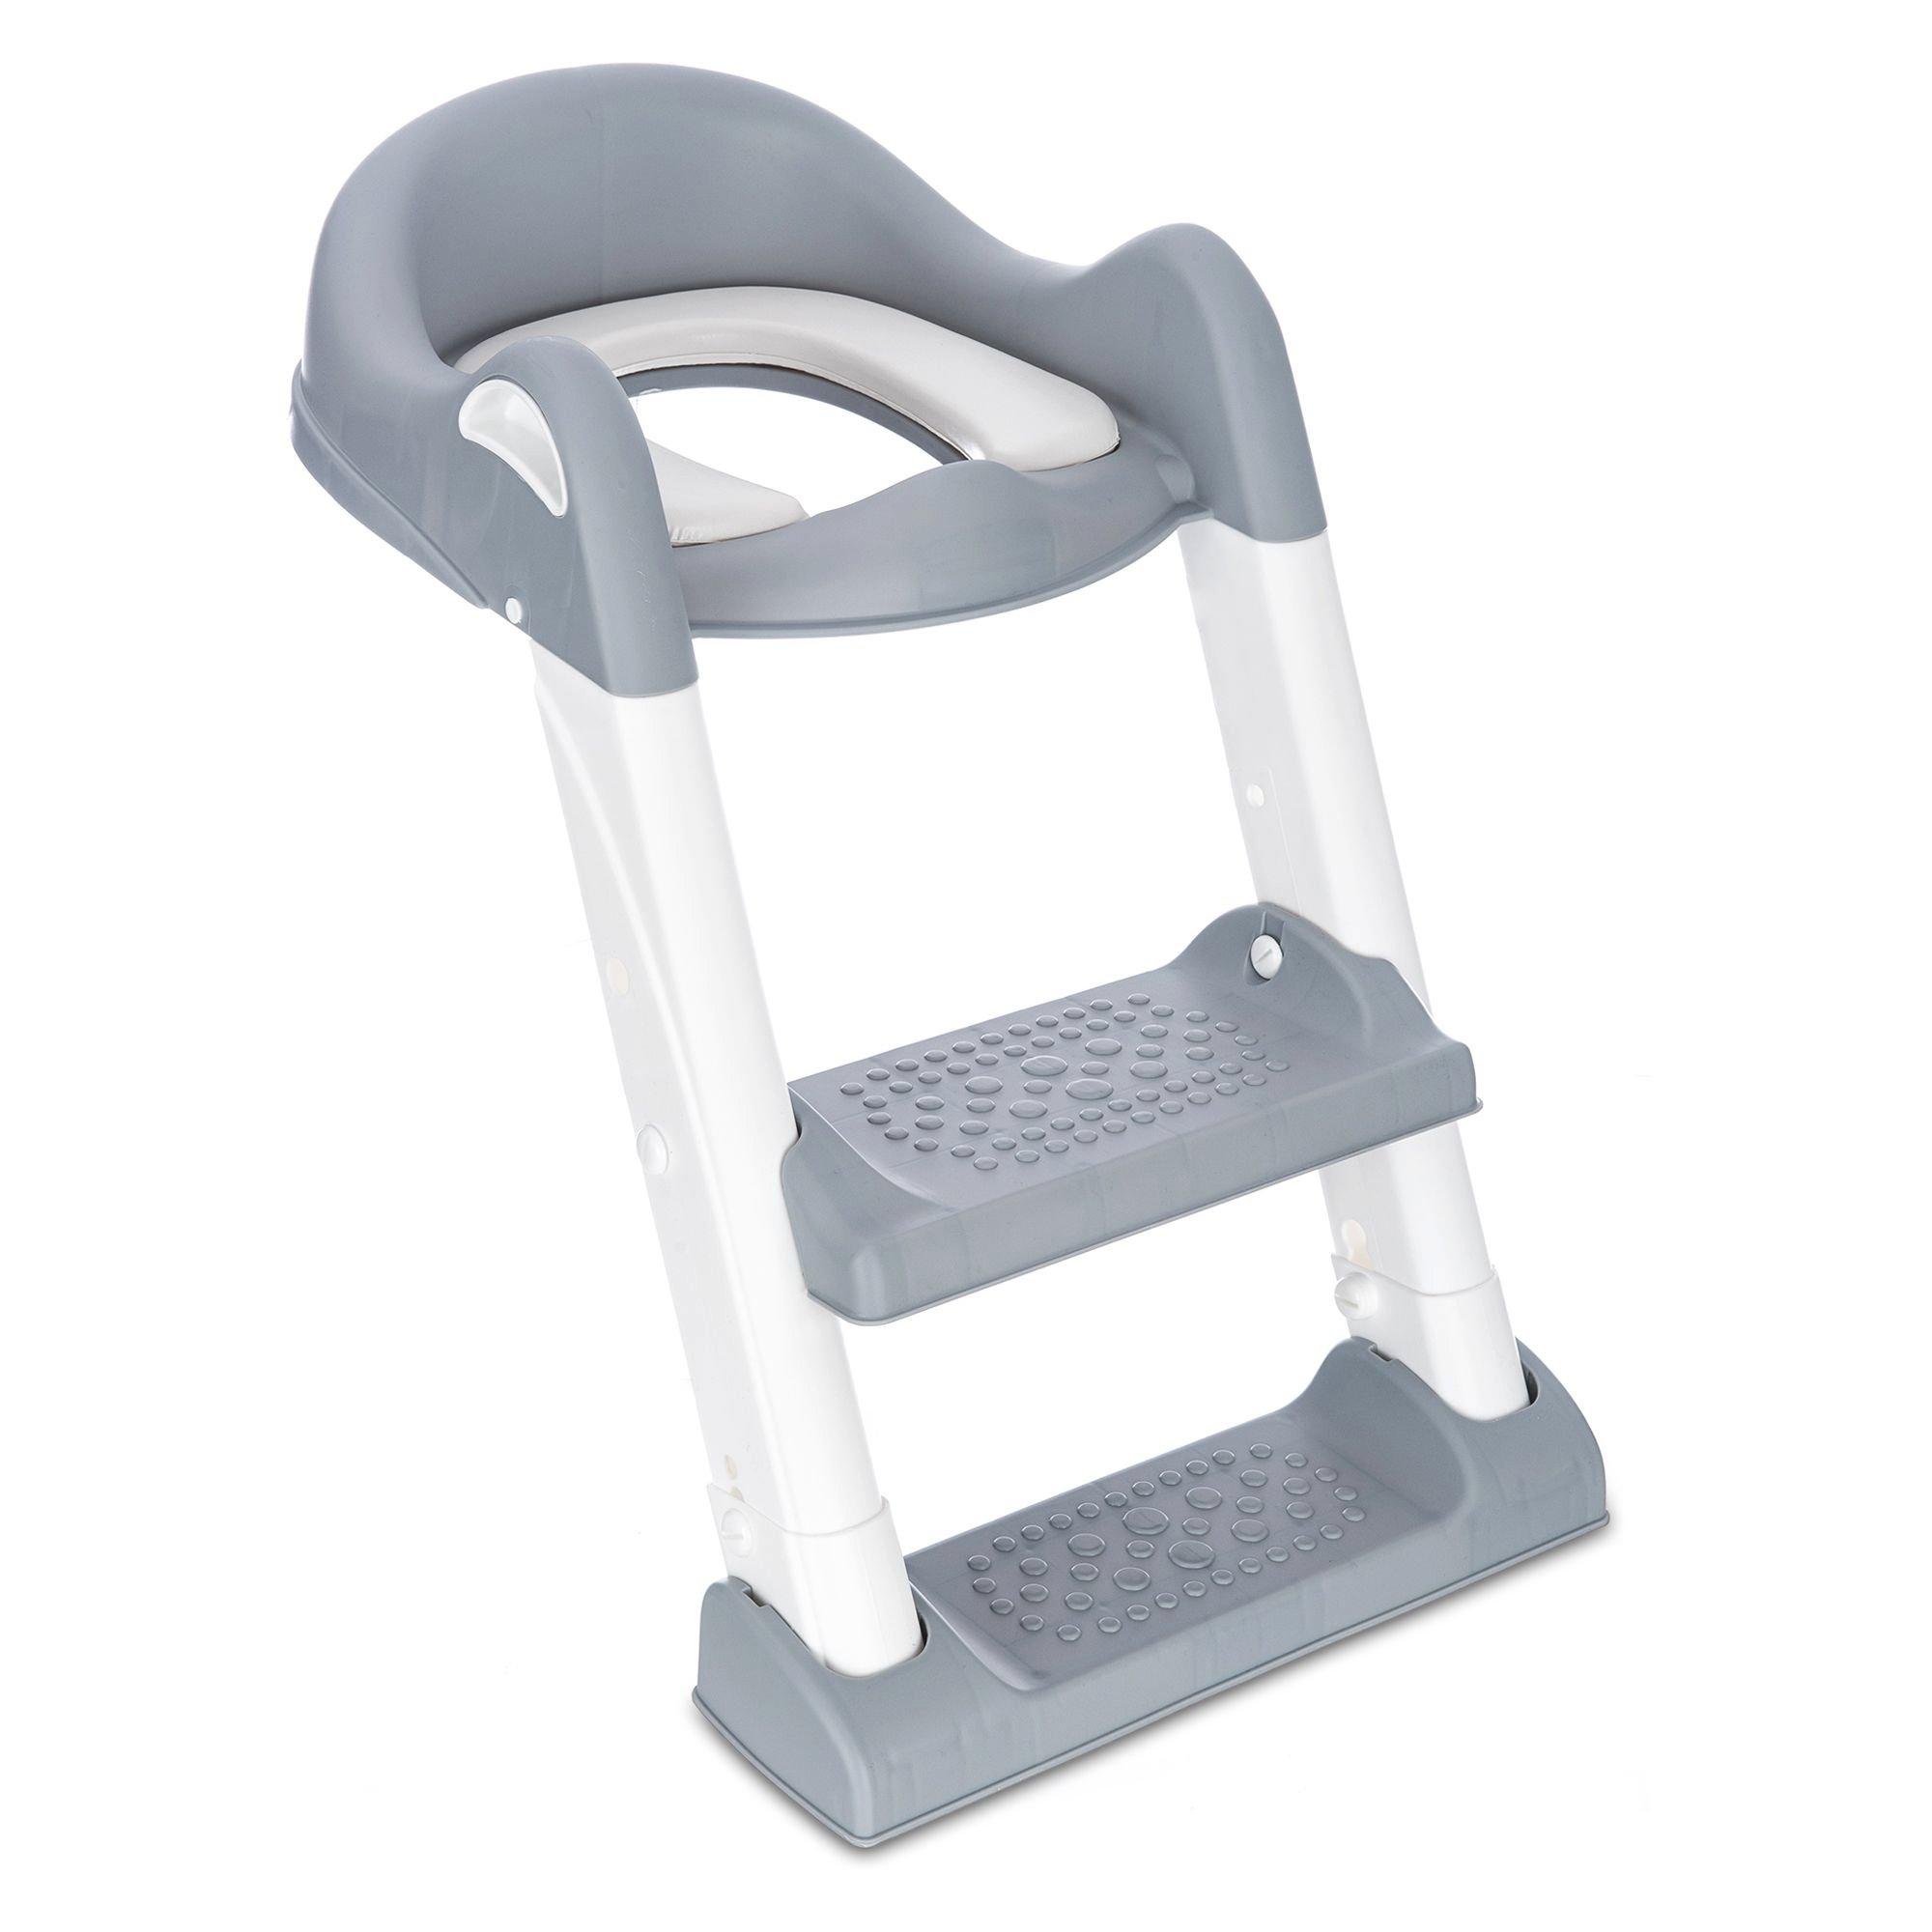 Toilet Trainer Padded Seat - White/Grey